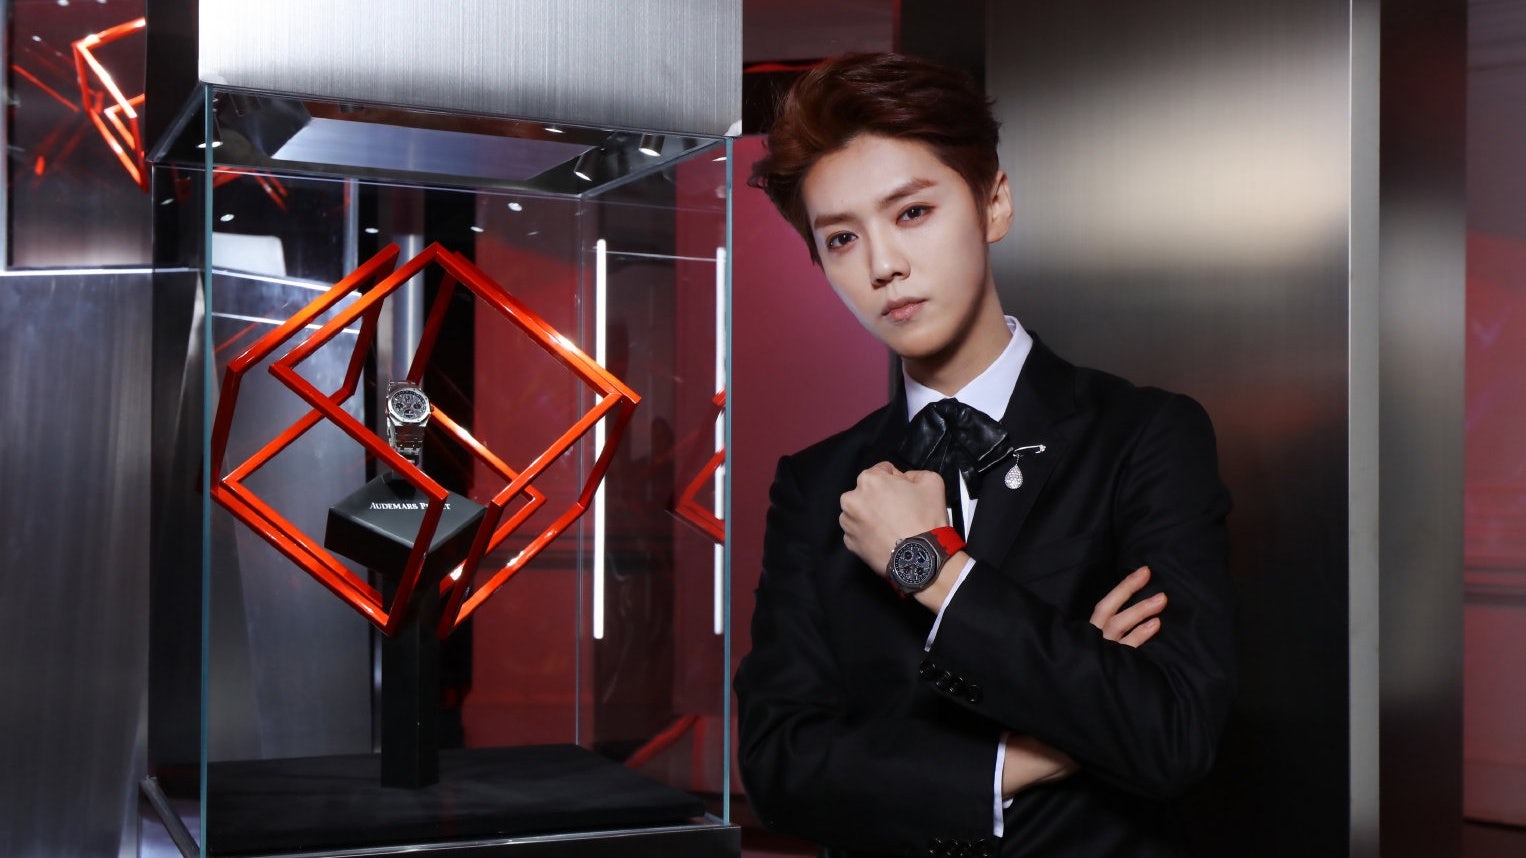 China’s superstar Lu Han cut ties with Swiss luxury watchmaker Audemars Piguet over insulting remarks made by the brand’s president. Photo: Audemars Piguet